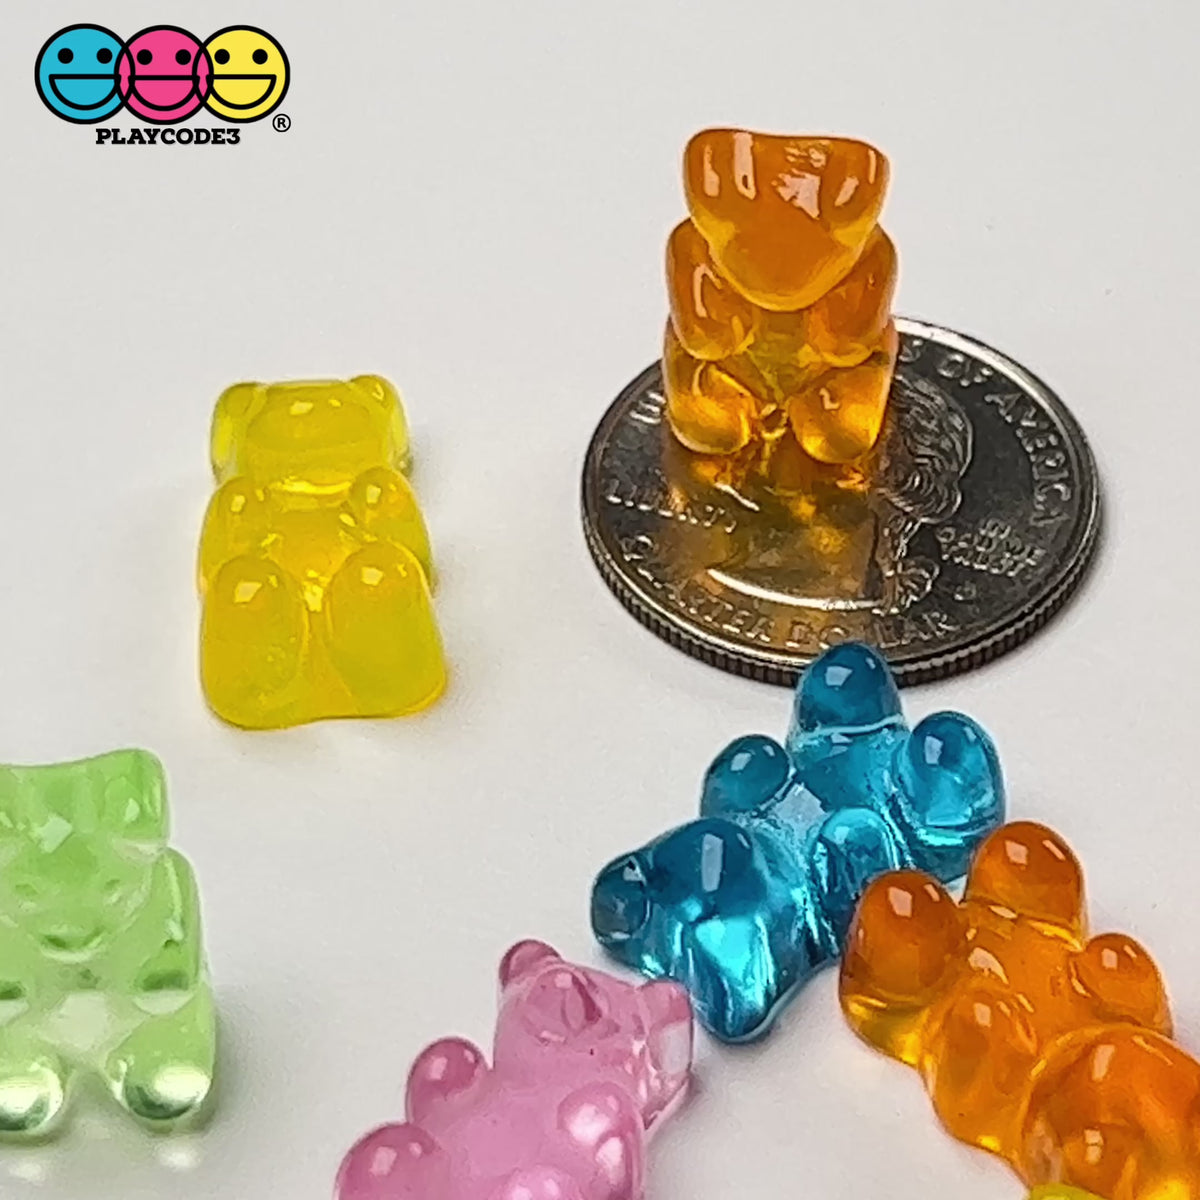 20pc 20mm 3D Gummy Bear Flatback Resin Candy Charms Colorful Novelty  Transparent Bears Gummies W/ Multicolored Sprinkle Confetti & Loop 